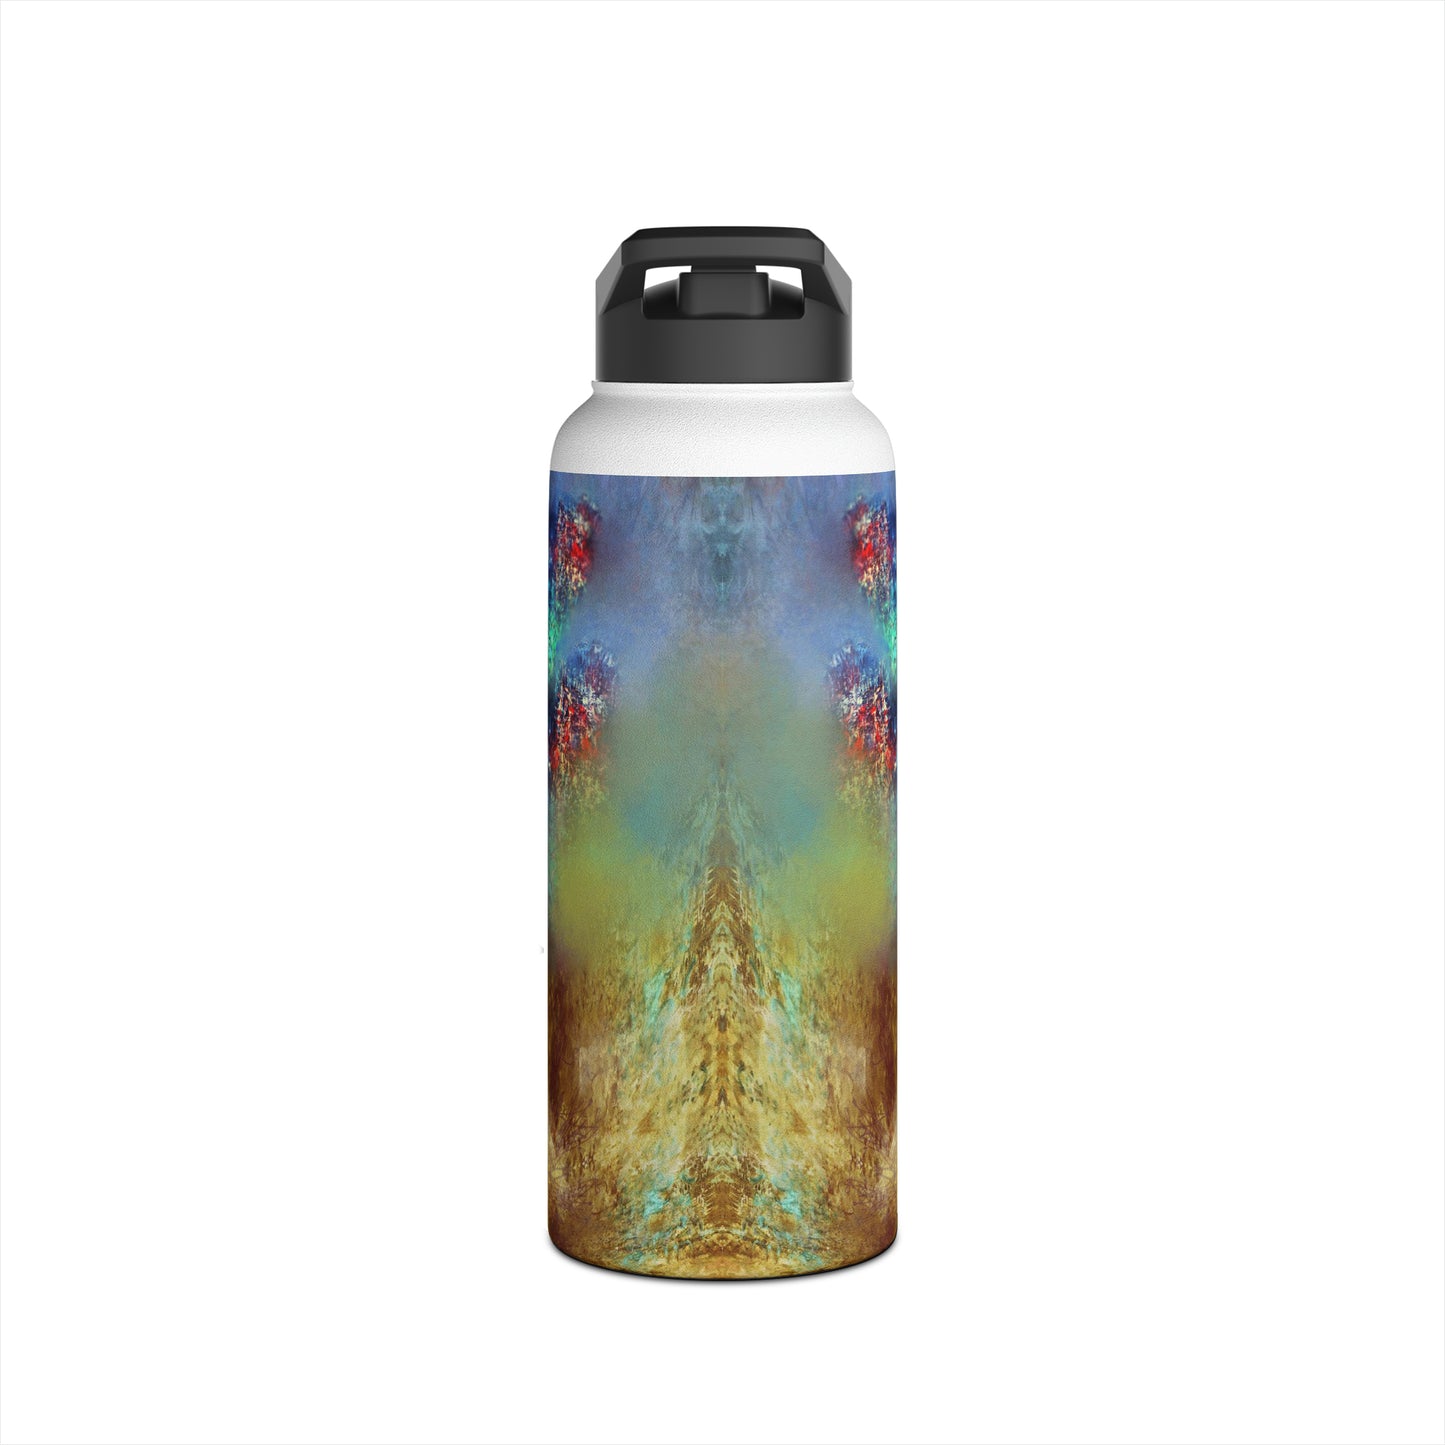 Blessed Visions Water Bottle